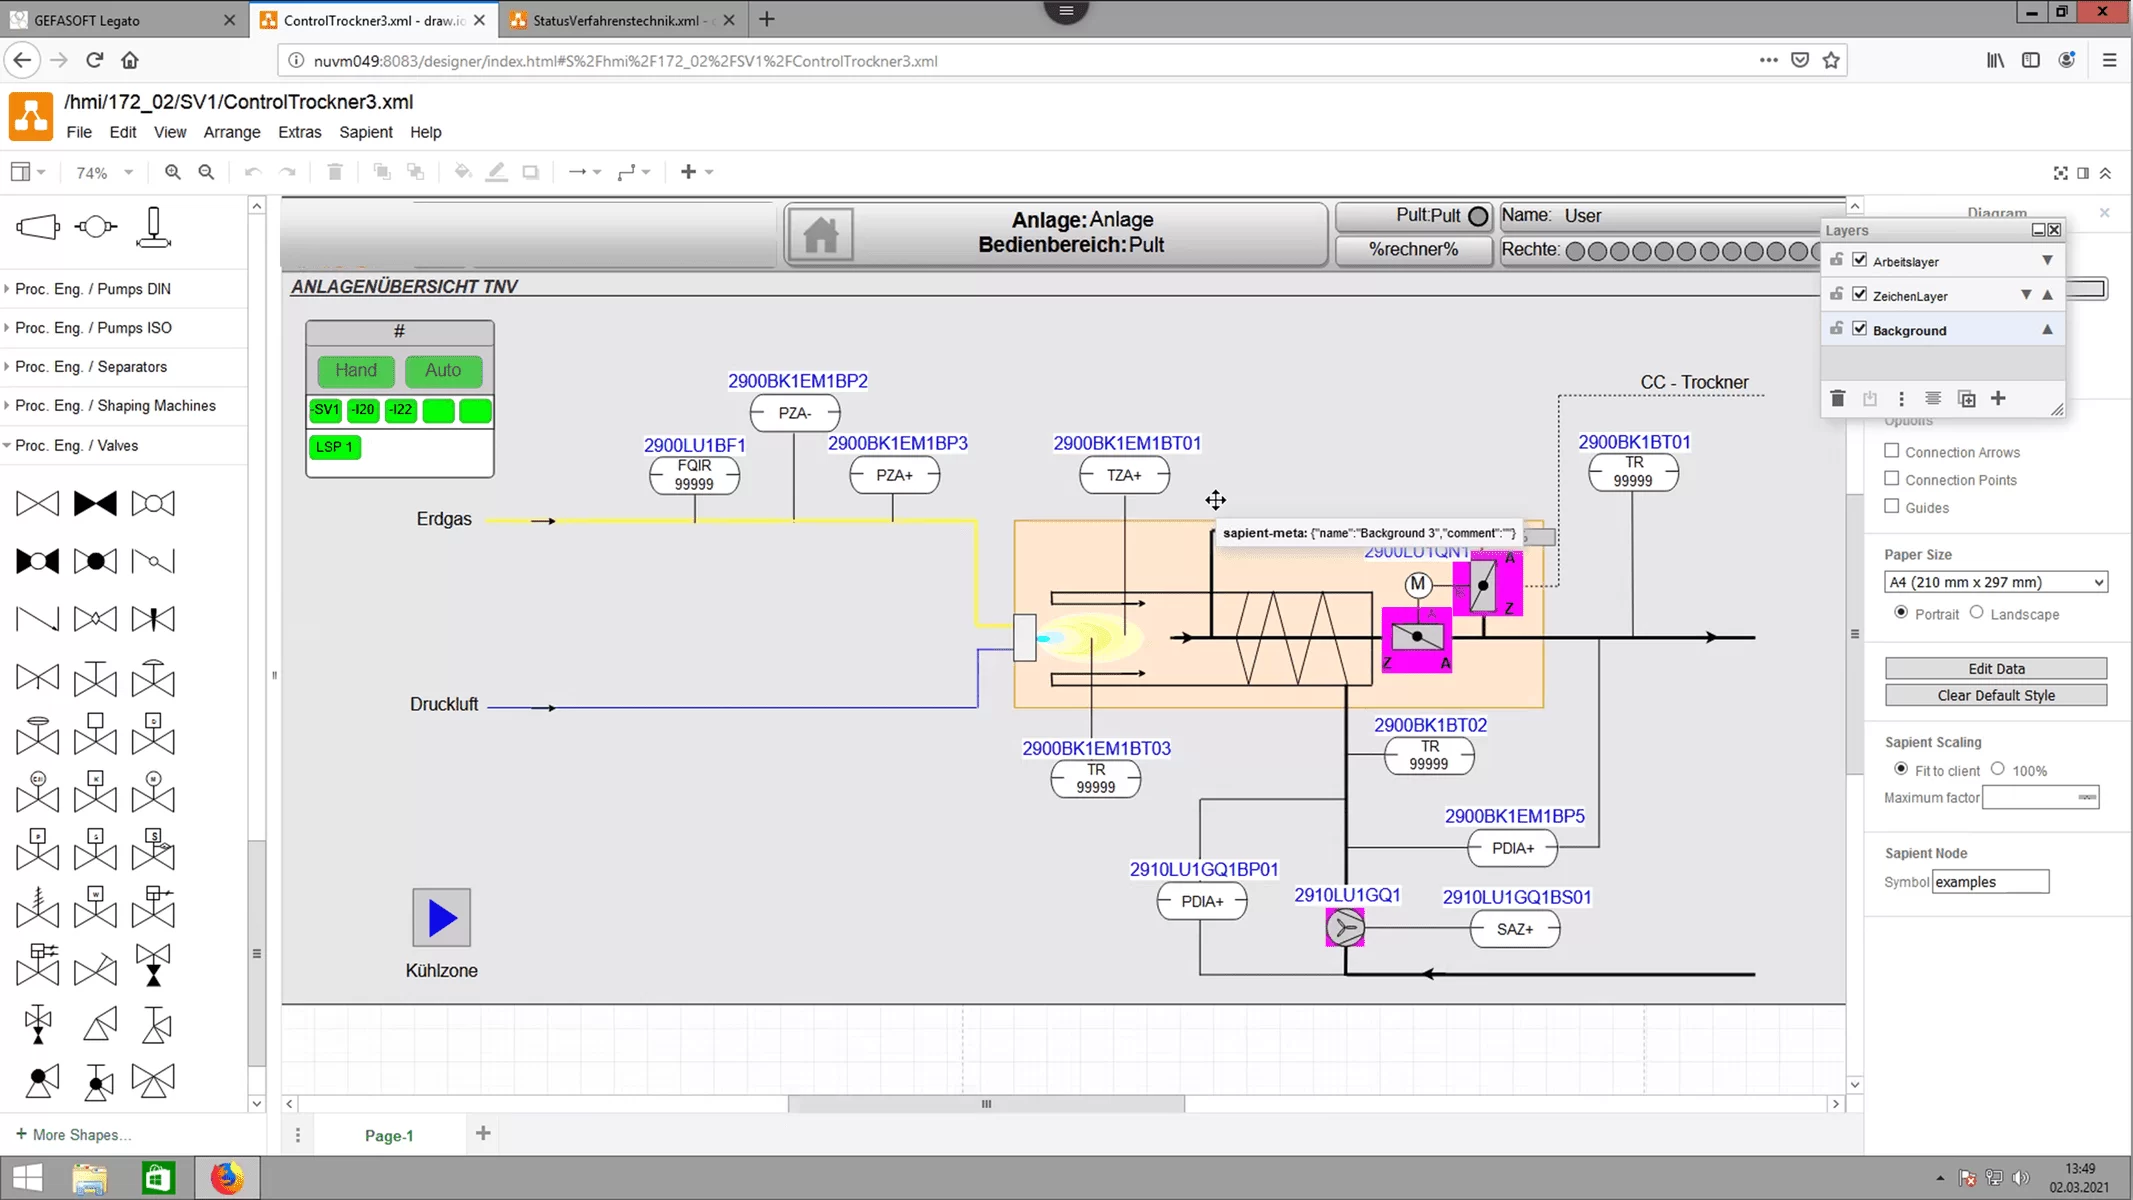 Editing the design within the HMI software